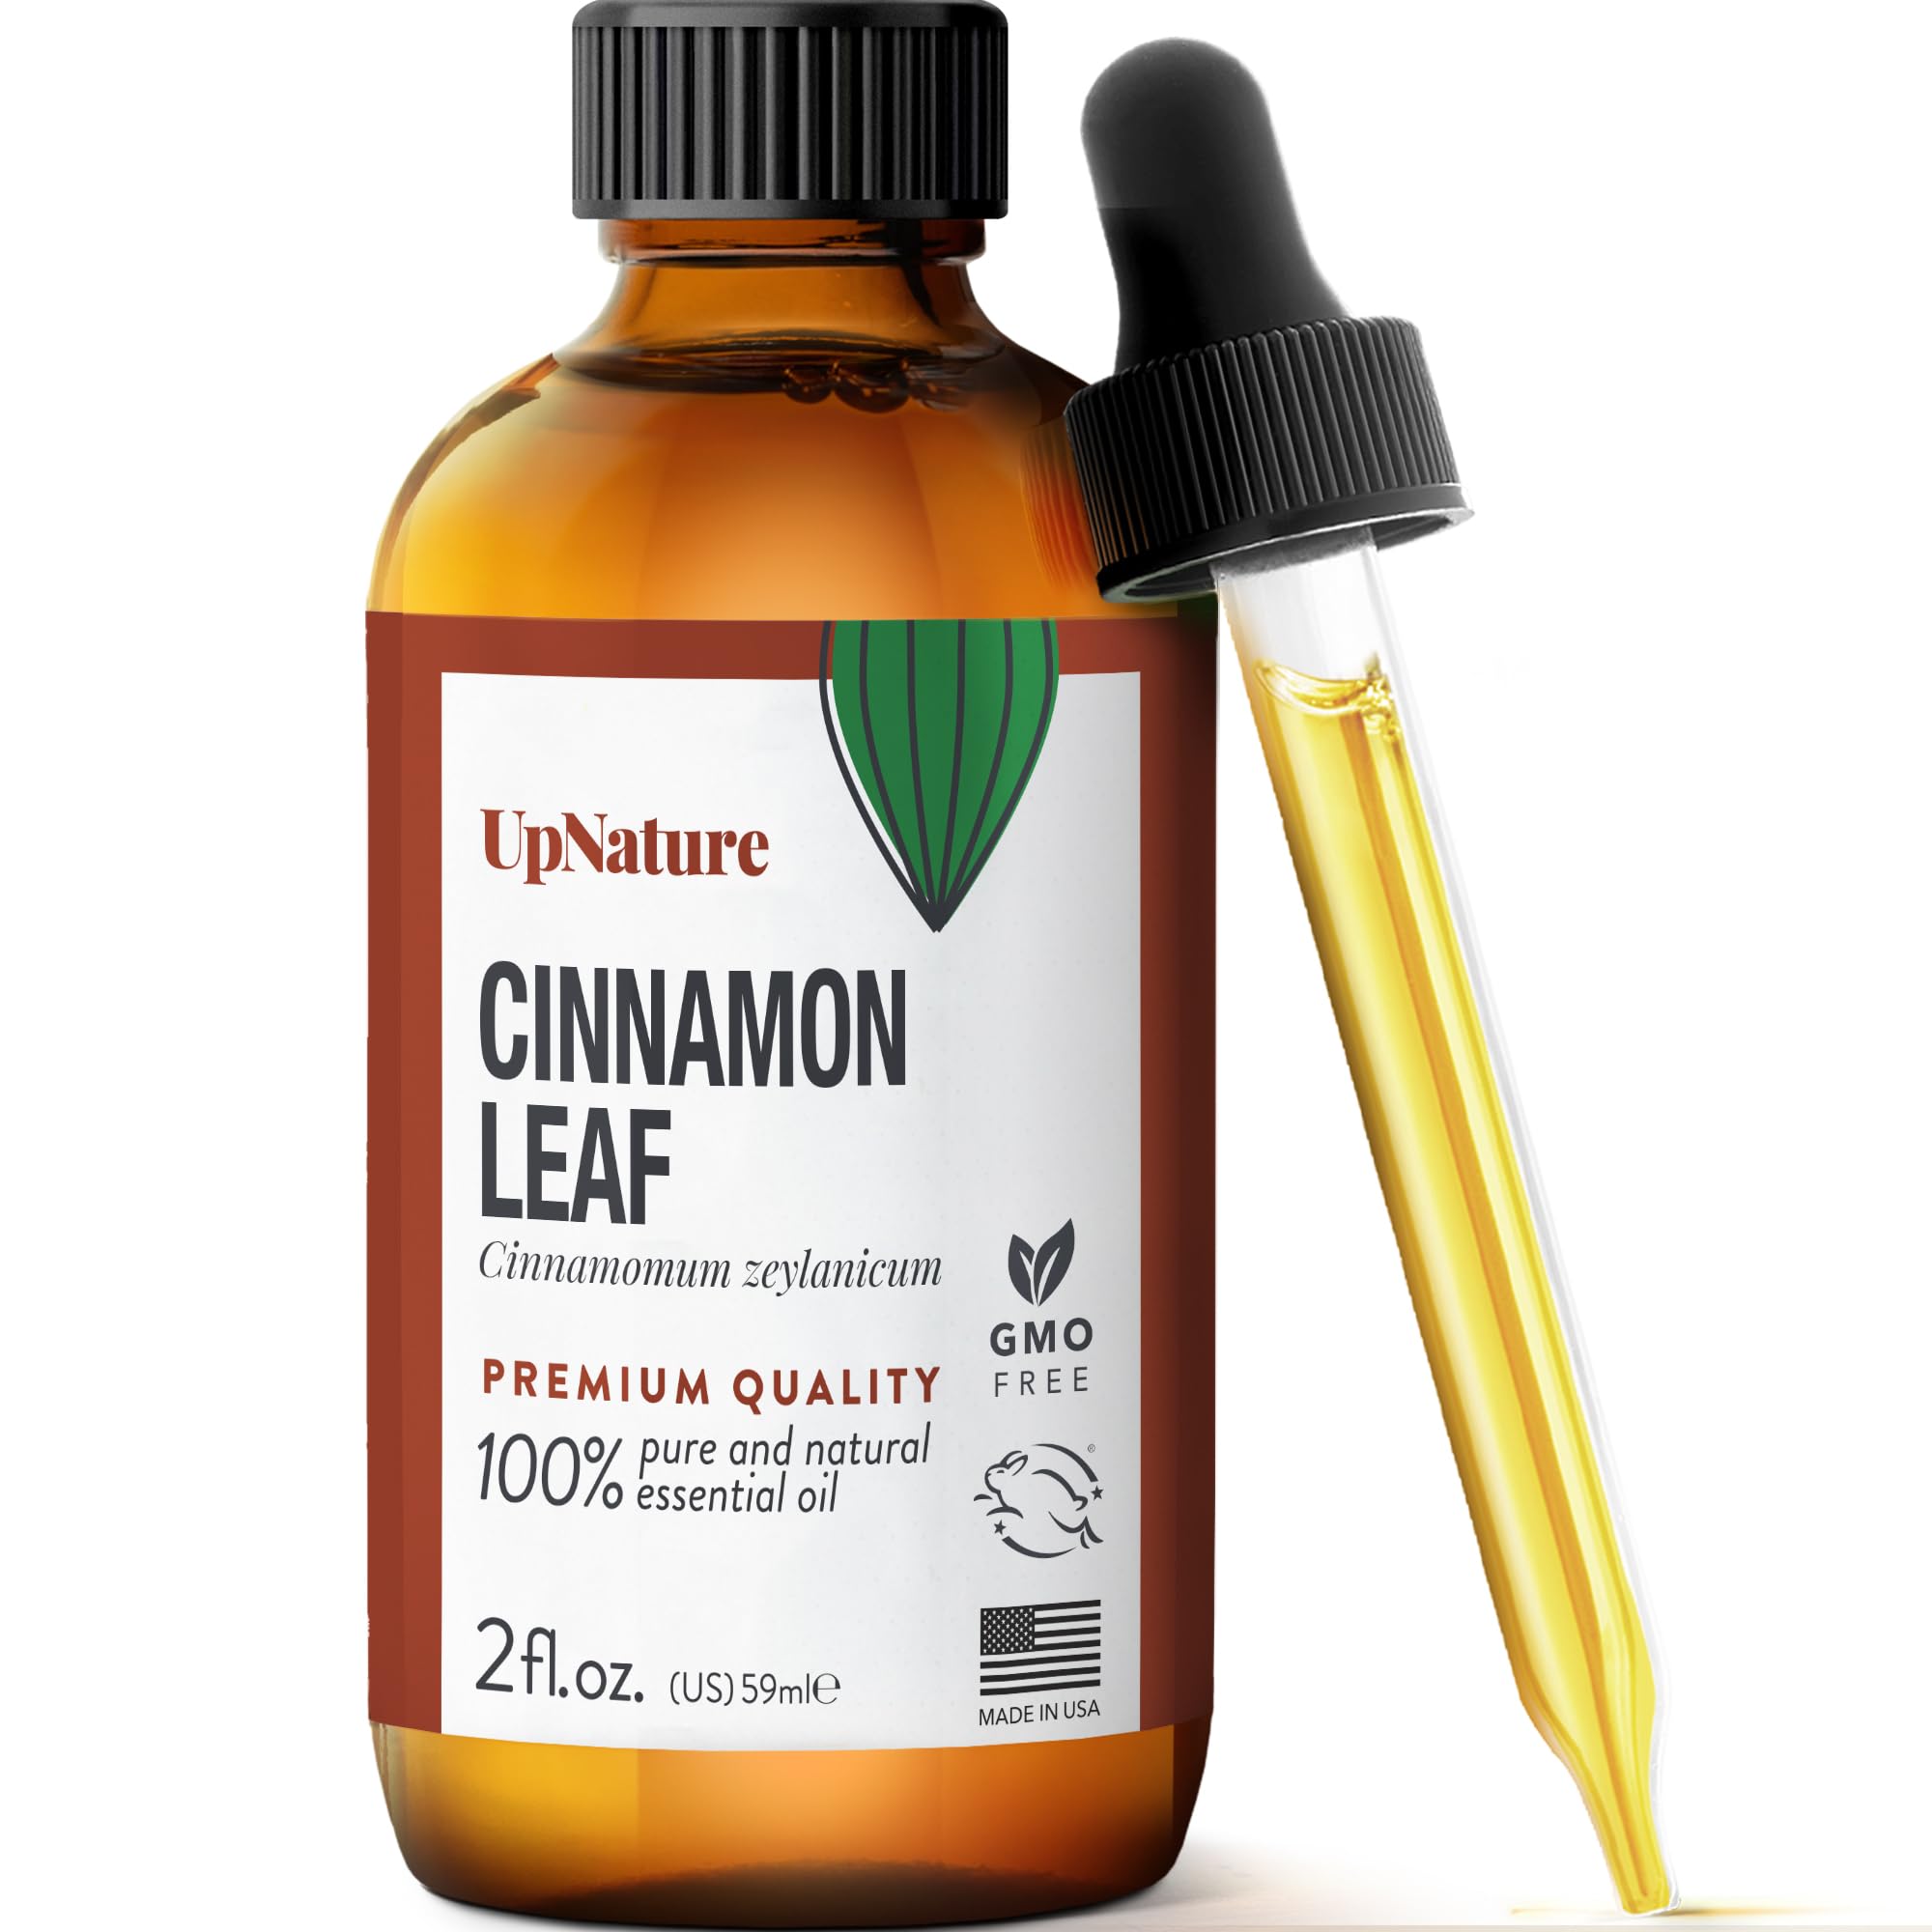 UpNature Cinnamon Essential Oil - 100% Natural & Pure, Undiluted, Premium Quality Aromatherapy Oil- Cinnamon Leaf Essential Oil Natural Pain Ease, Alleviates Muscle Aches, Sickness & Boost Mood, 2oz